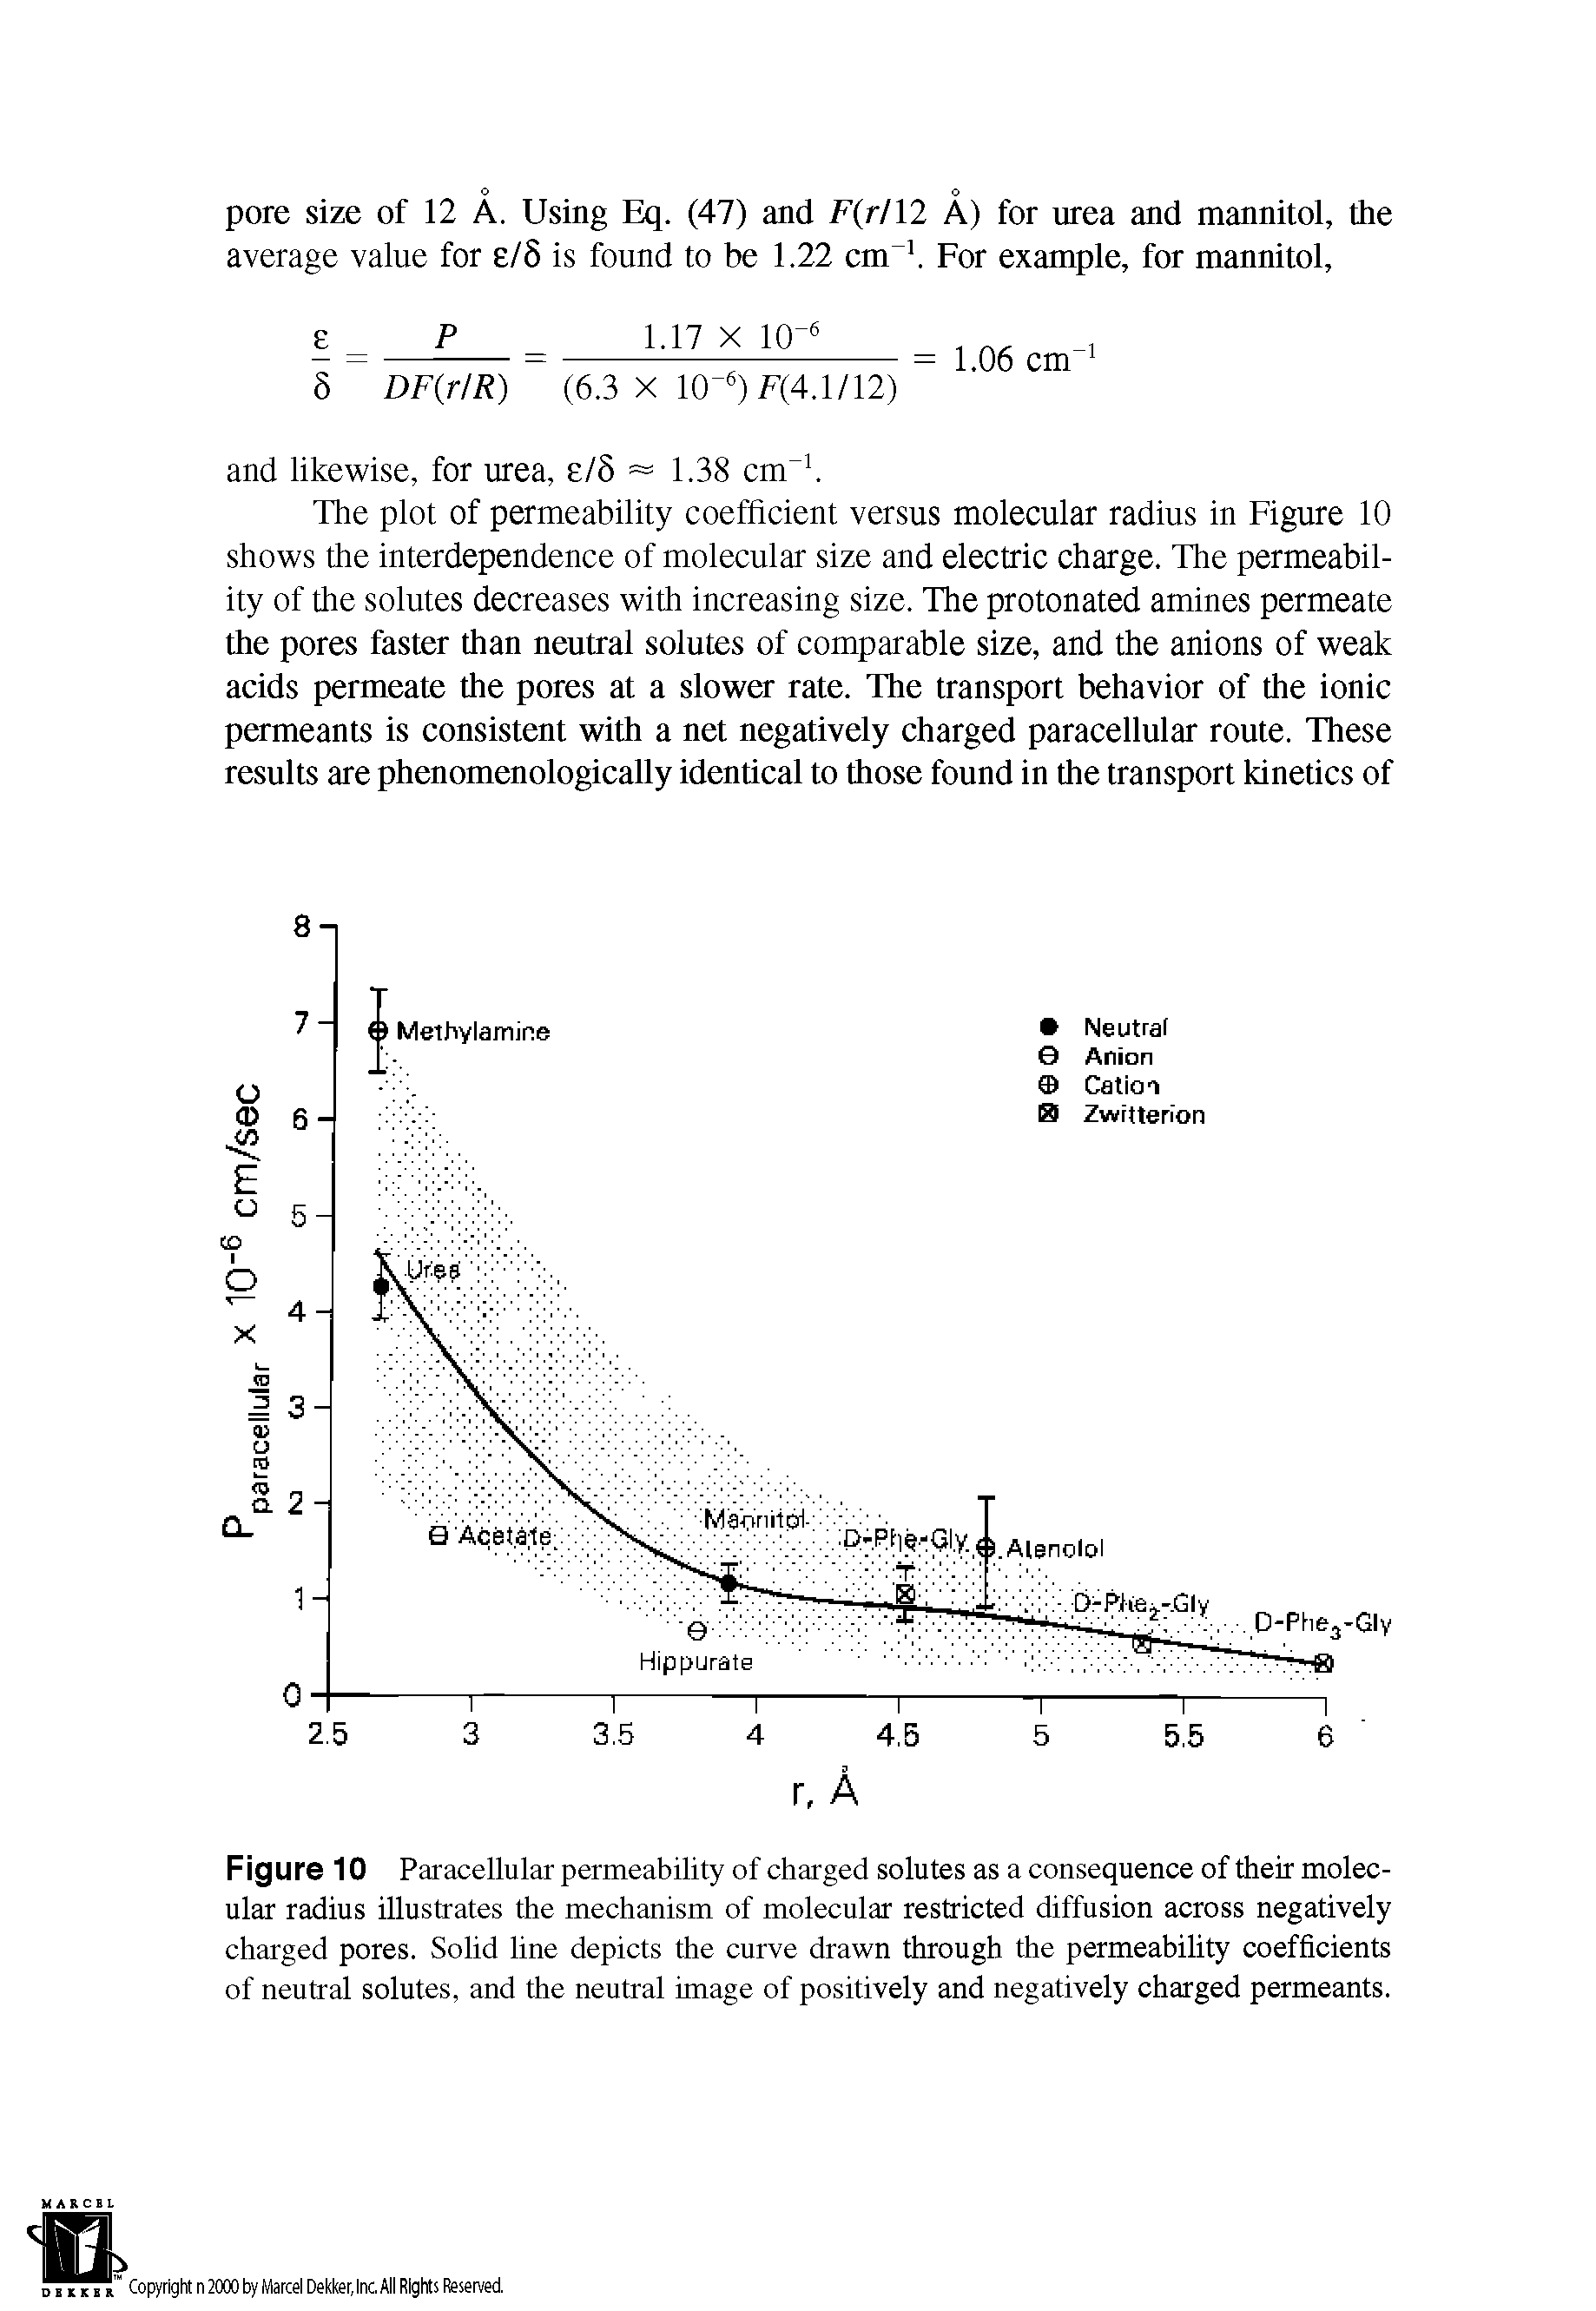 Figure 10 Paracellular permeability of charged solutes as a consequence of their molecular radius illustrates the mechanism of molecular restricted diffusion across negatively charged pores. Solid line depicts the curve drawn through the permeability coefficients of neutral solutes, and the neutral image of positively and negatively charged permeants.